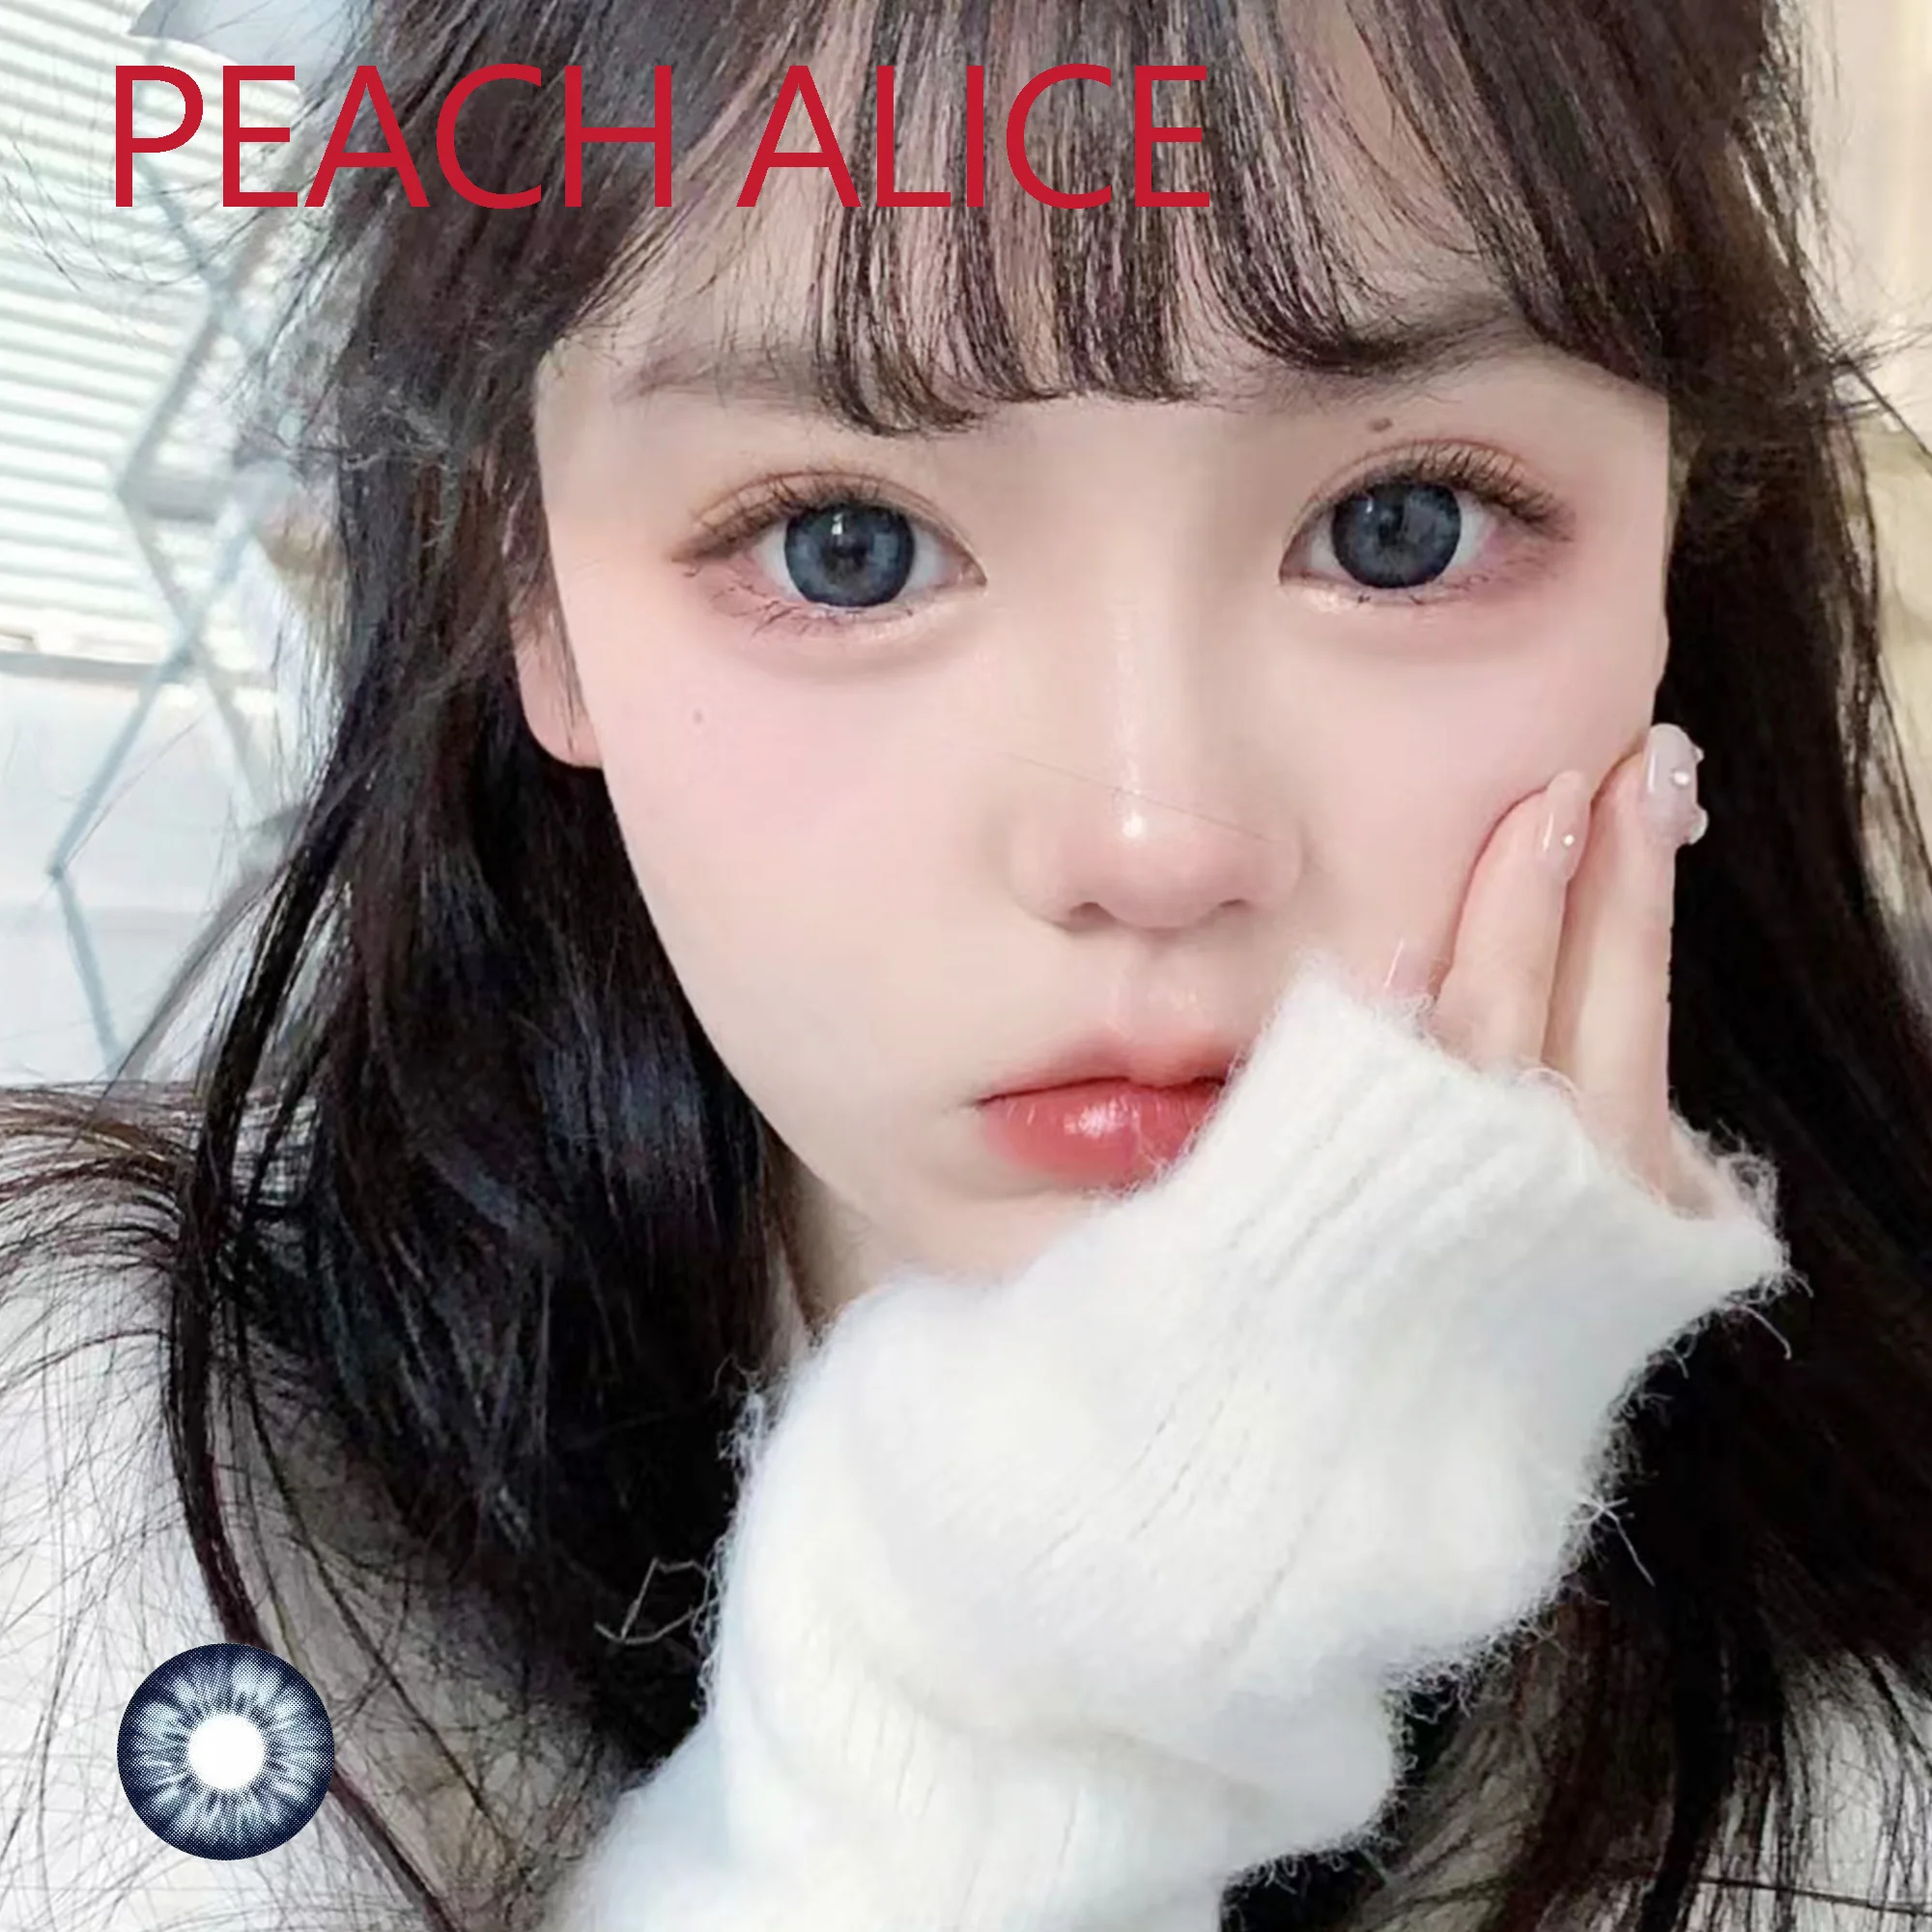 

14.50mm Soft Contacts Lenses with Power for Eye Colors Dolly Eyewear Accessories линзы для глаз цветные Peach Alice Blue